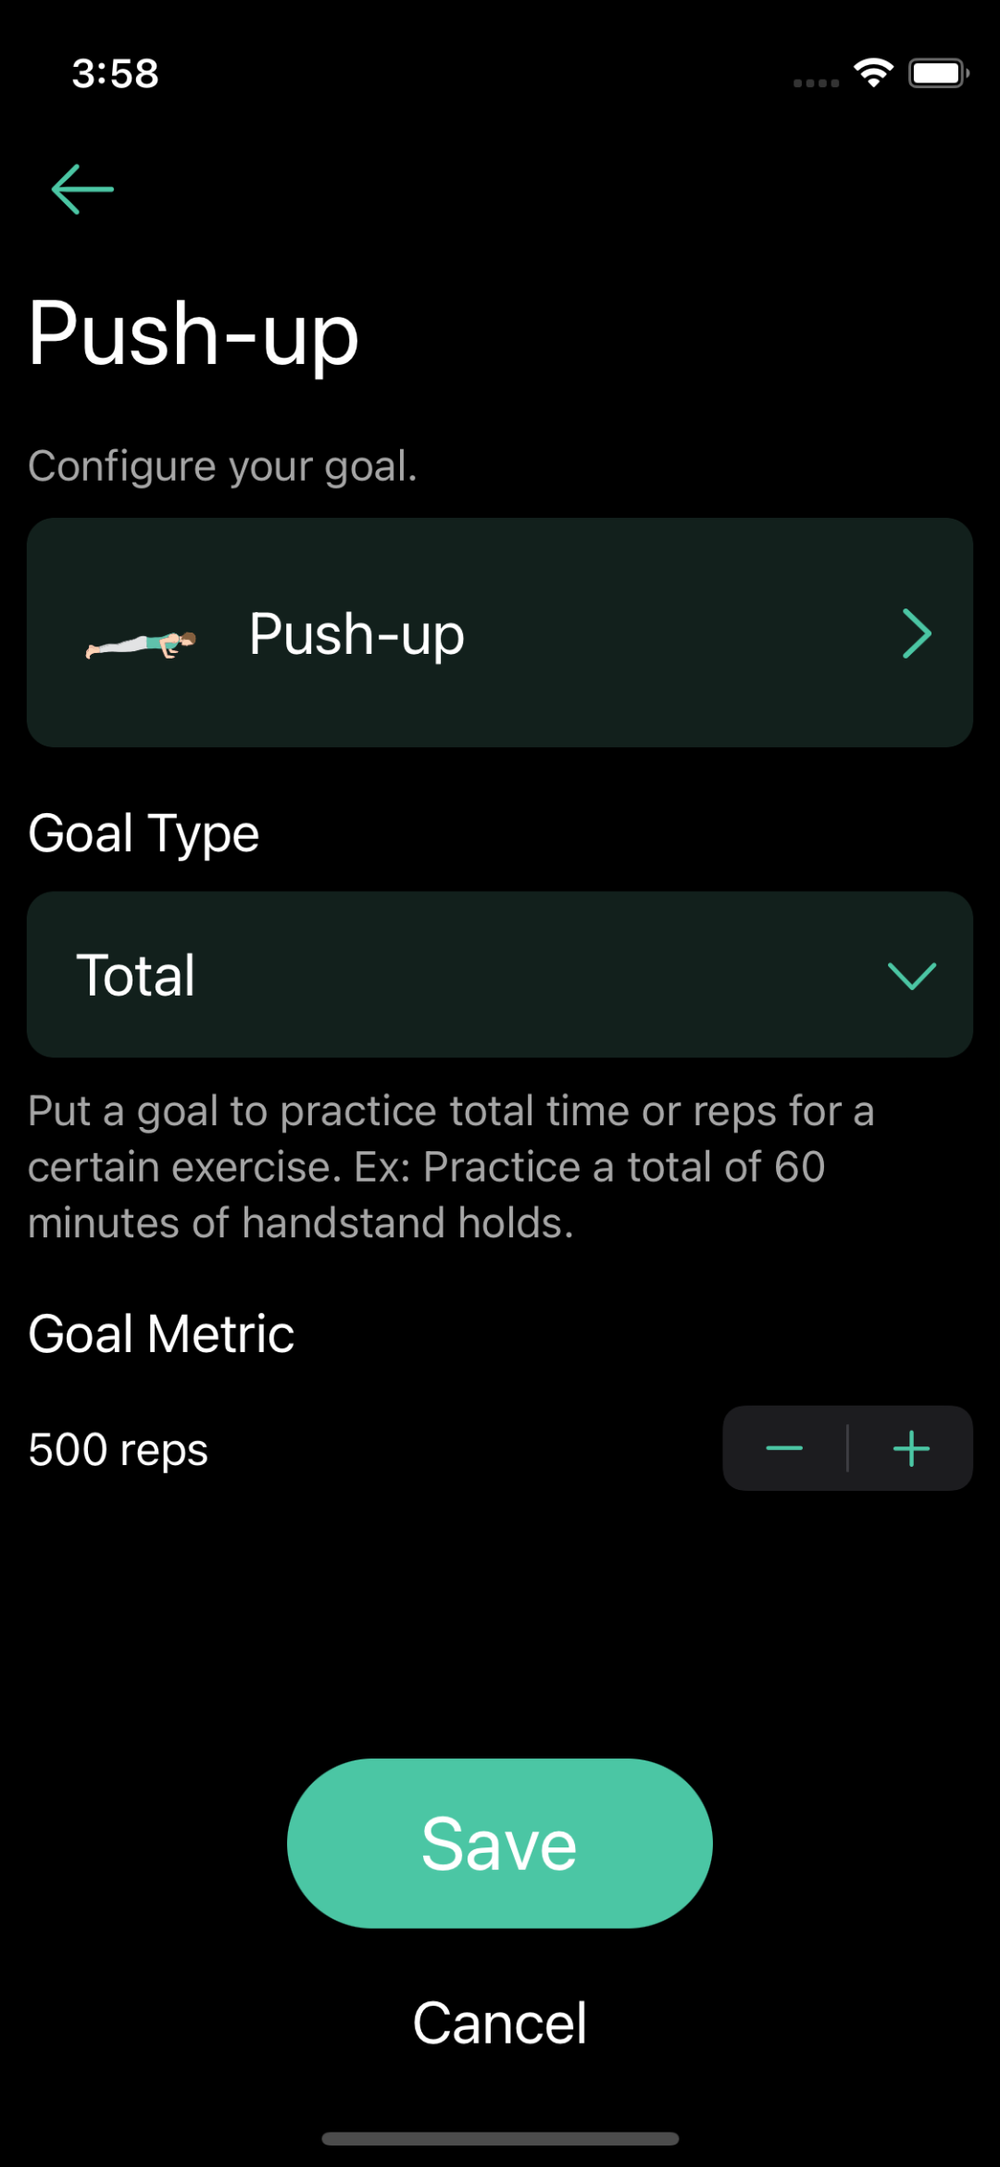 Configure goal with a total of 500 push-up reps